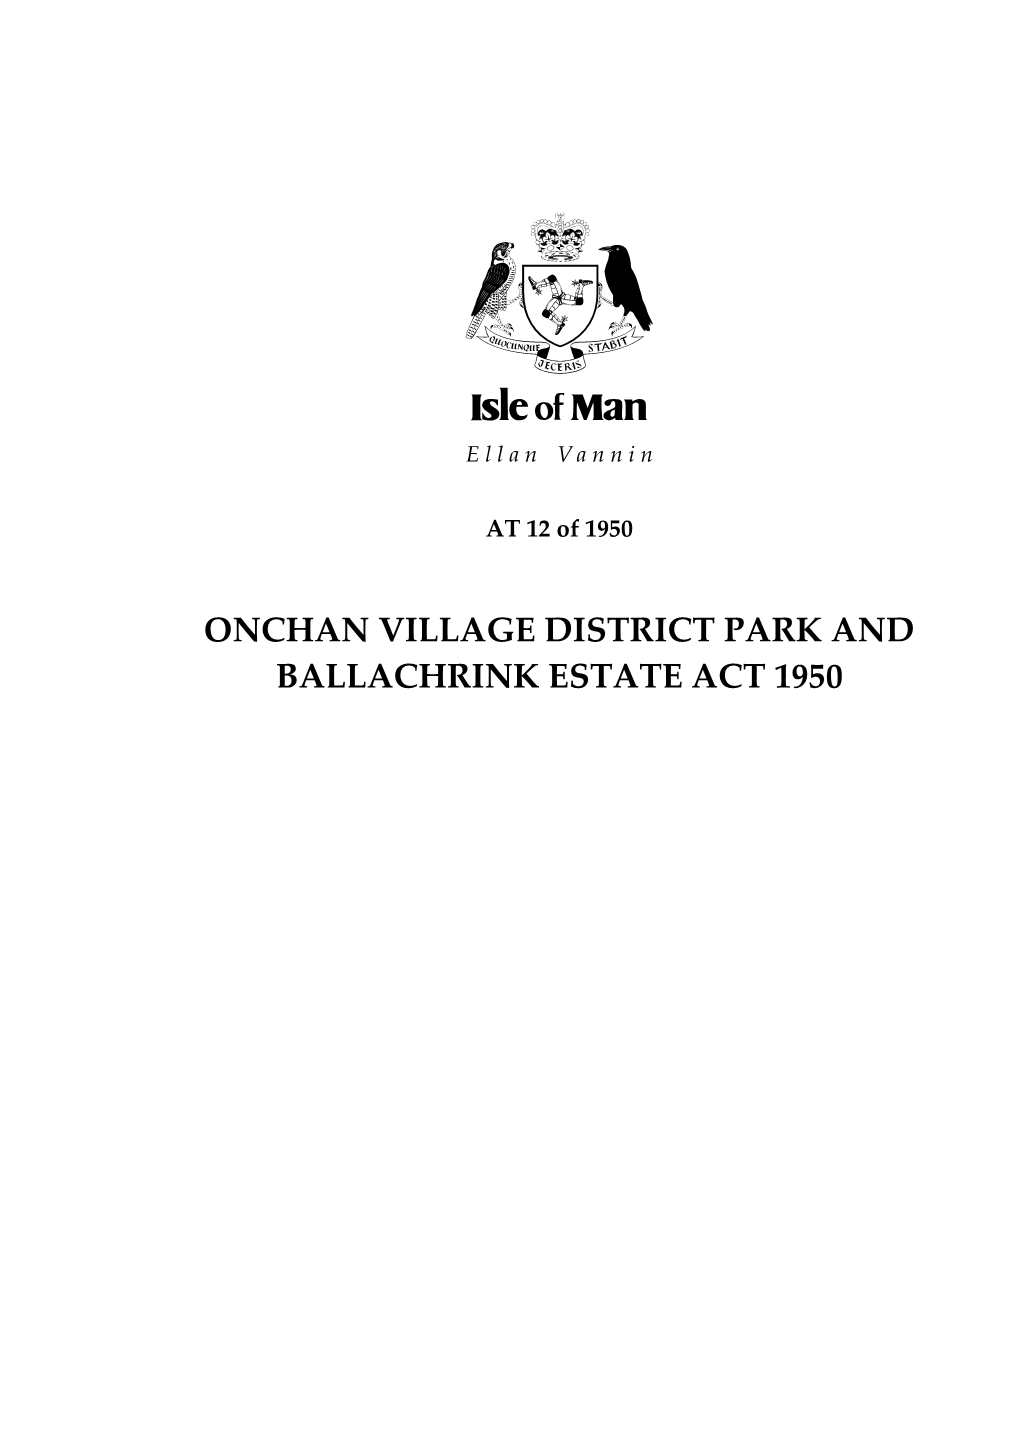 Onchan Village District Park and Ballachrink Estate Act 1950